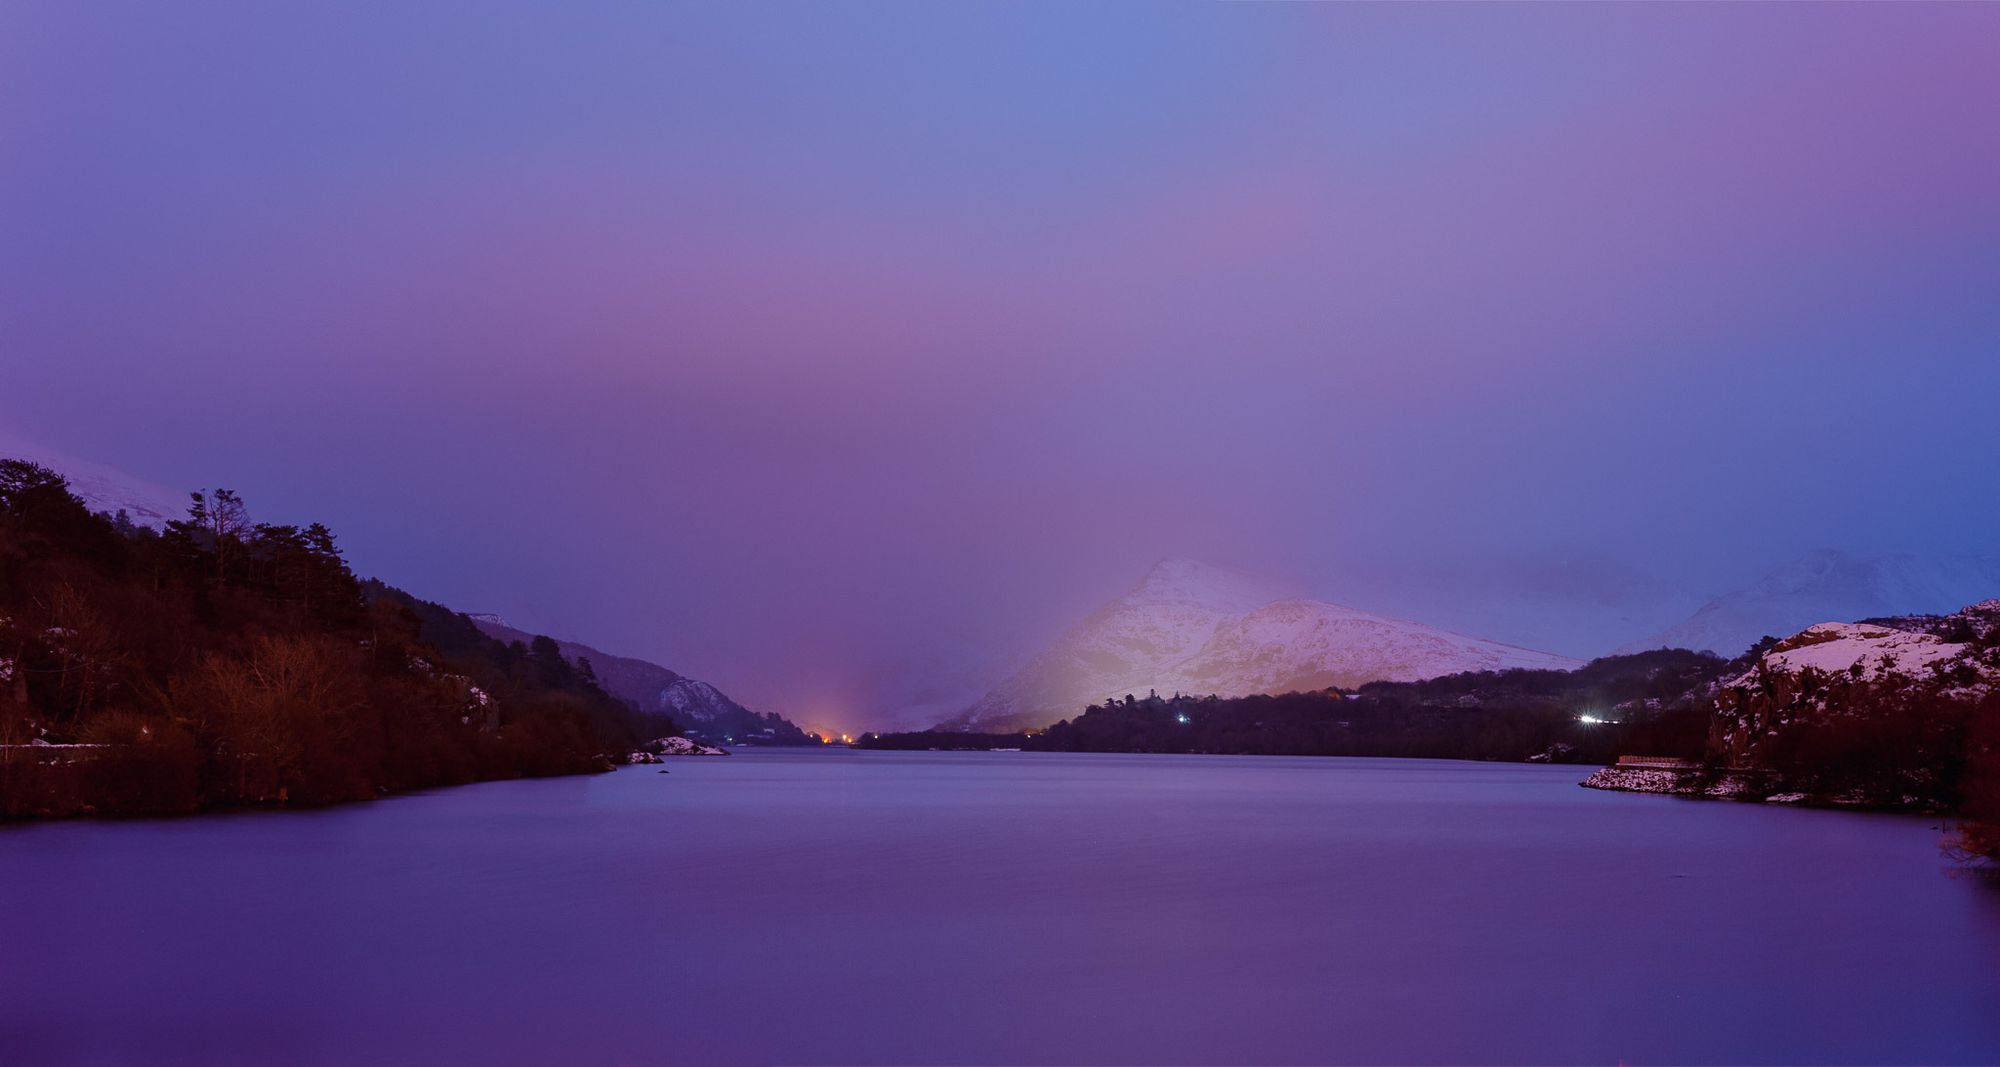 Purple dusk sky over Snowdonia mountains viewed from Lake Pardarn.